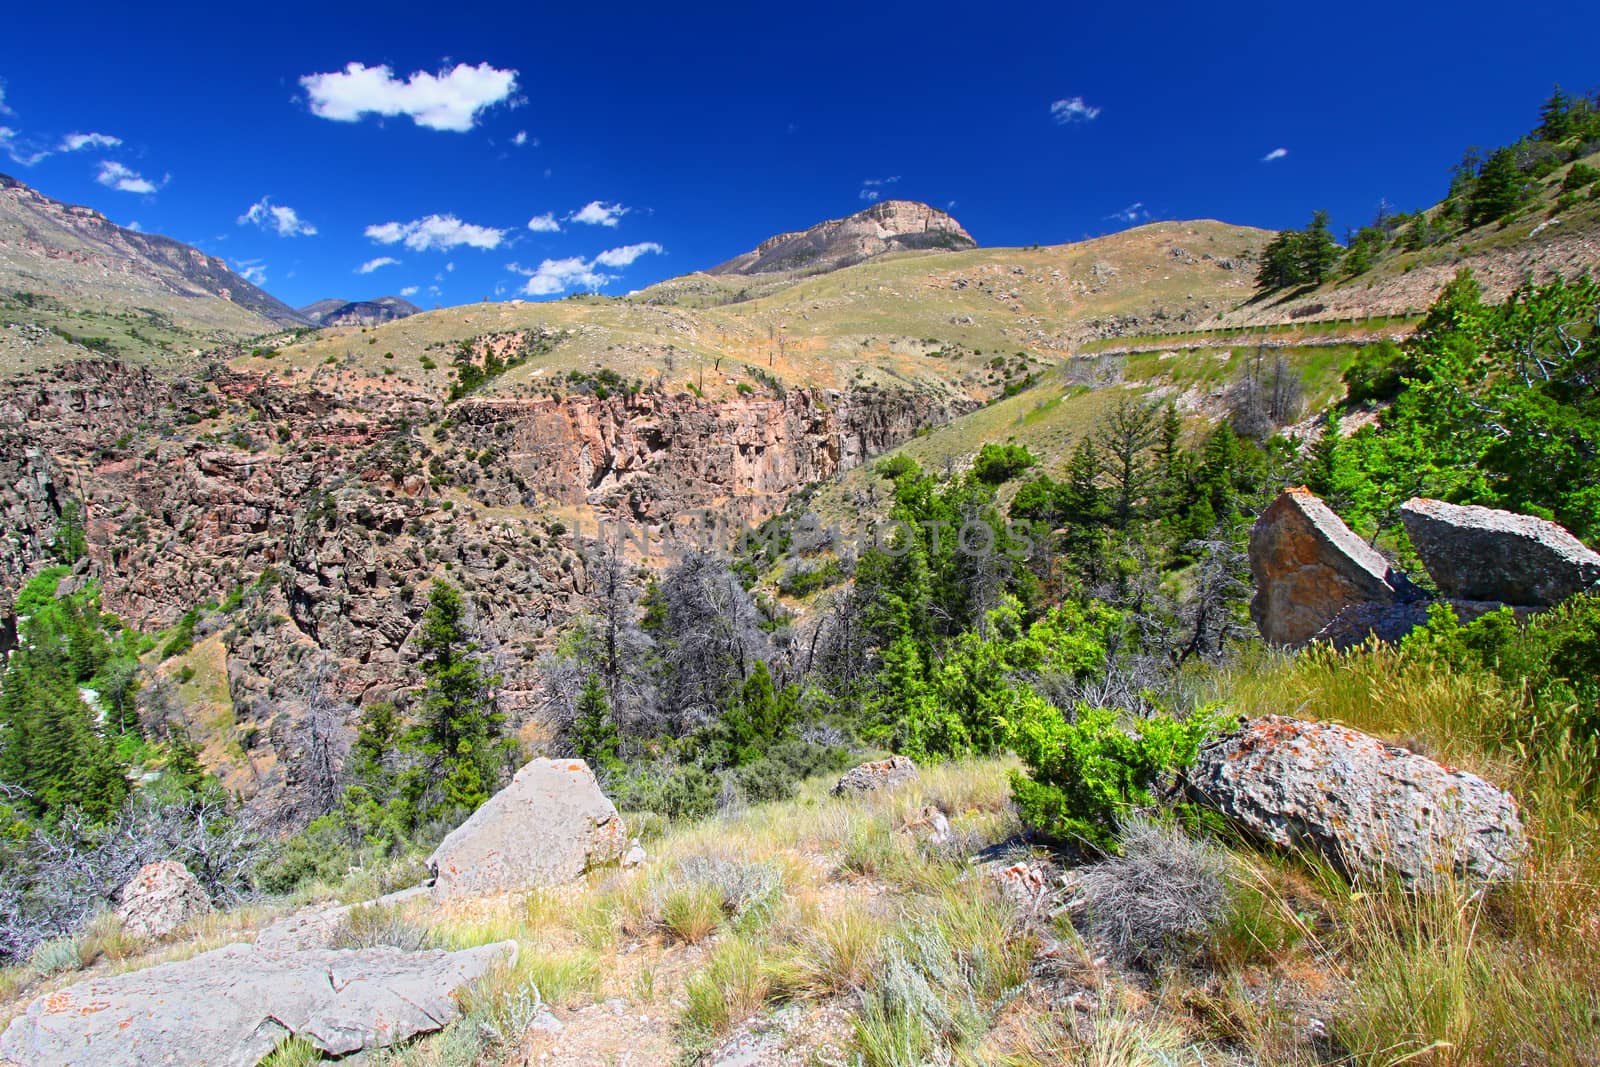 Rugged mountain scenery of the Bighorn National Forest in Wyoming.